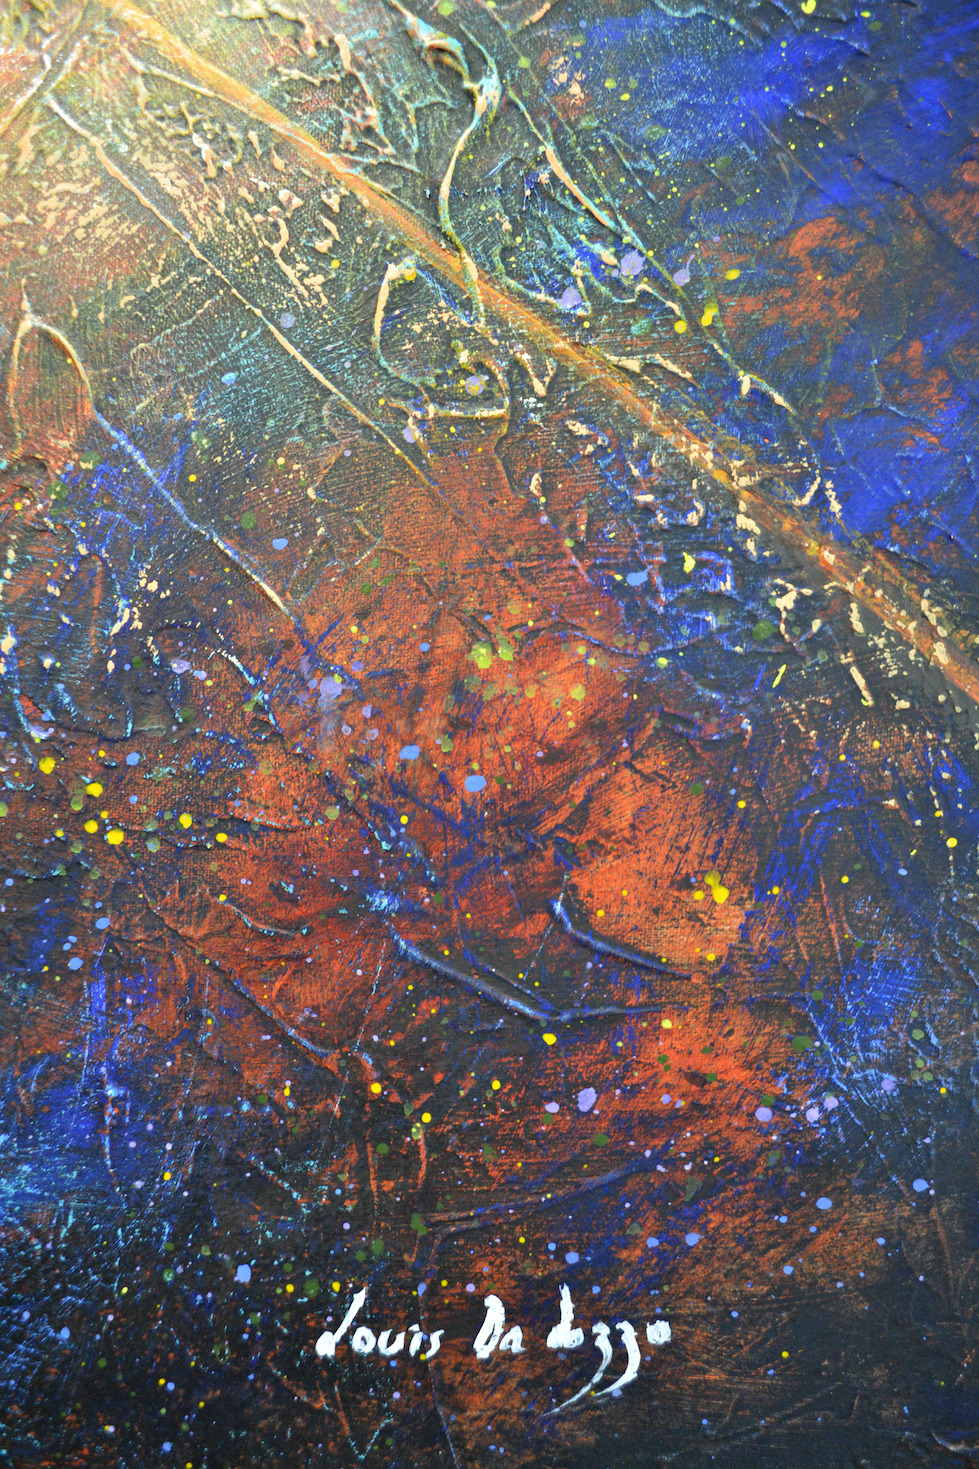 Close Up Signature Of Acrylic Painting "Cape Leveque Aerial View 2" By Louis Dalozzo